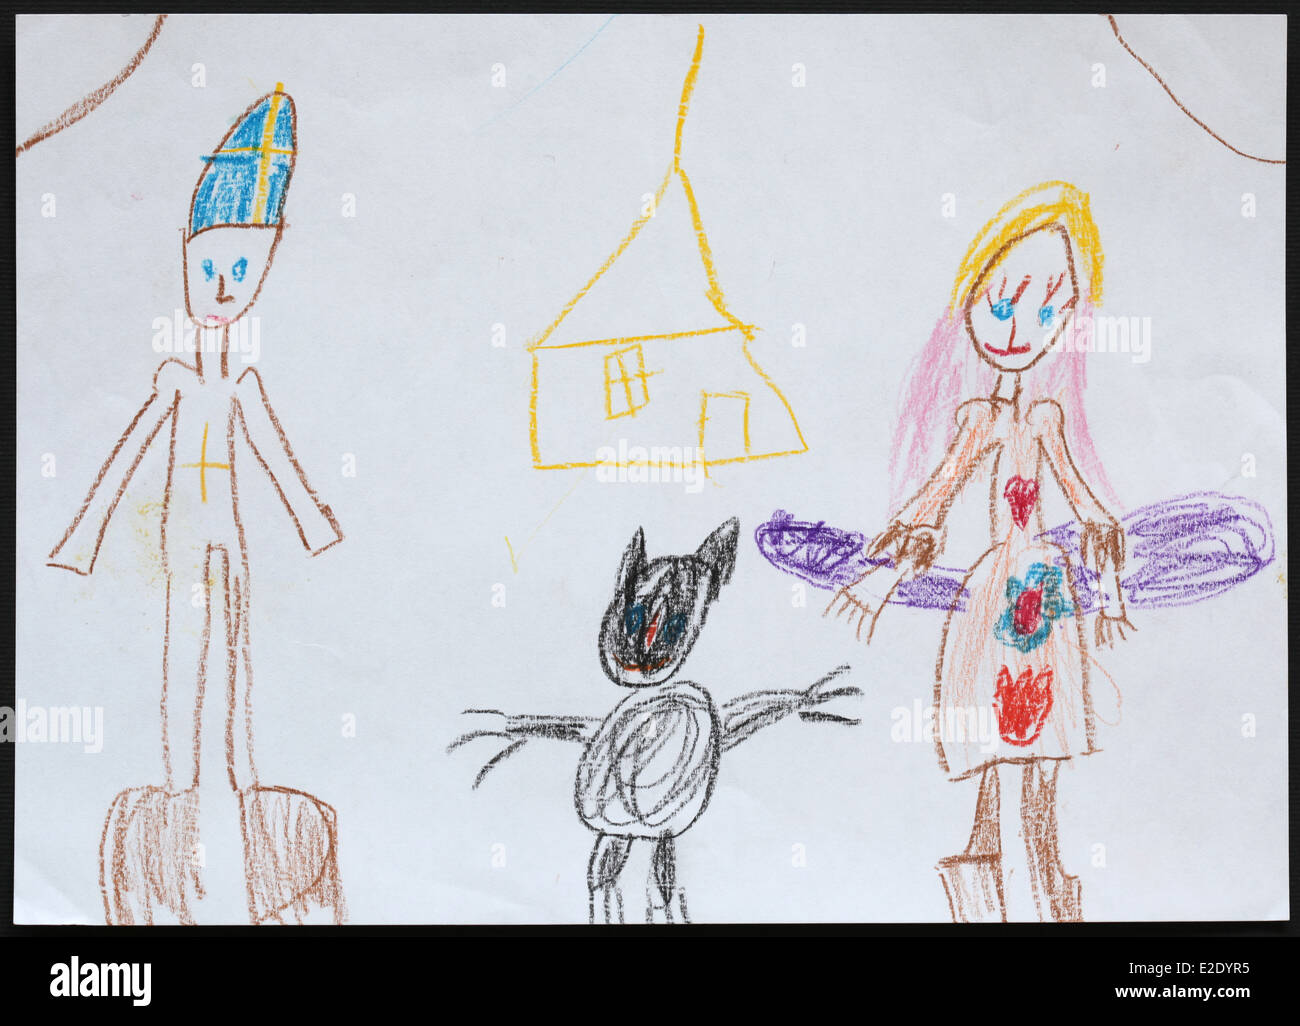 Child's drawing of Saint Nicholas followed by the Angel and the Devil and a yellow house drawn by a five-year-old girl. Stock Photo